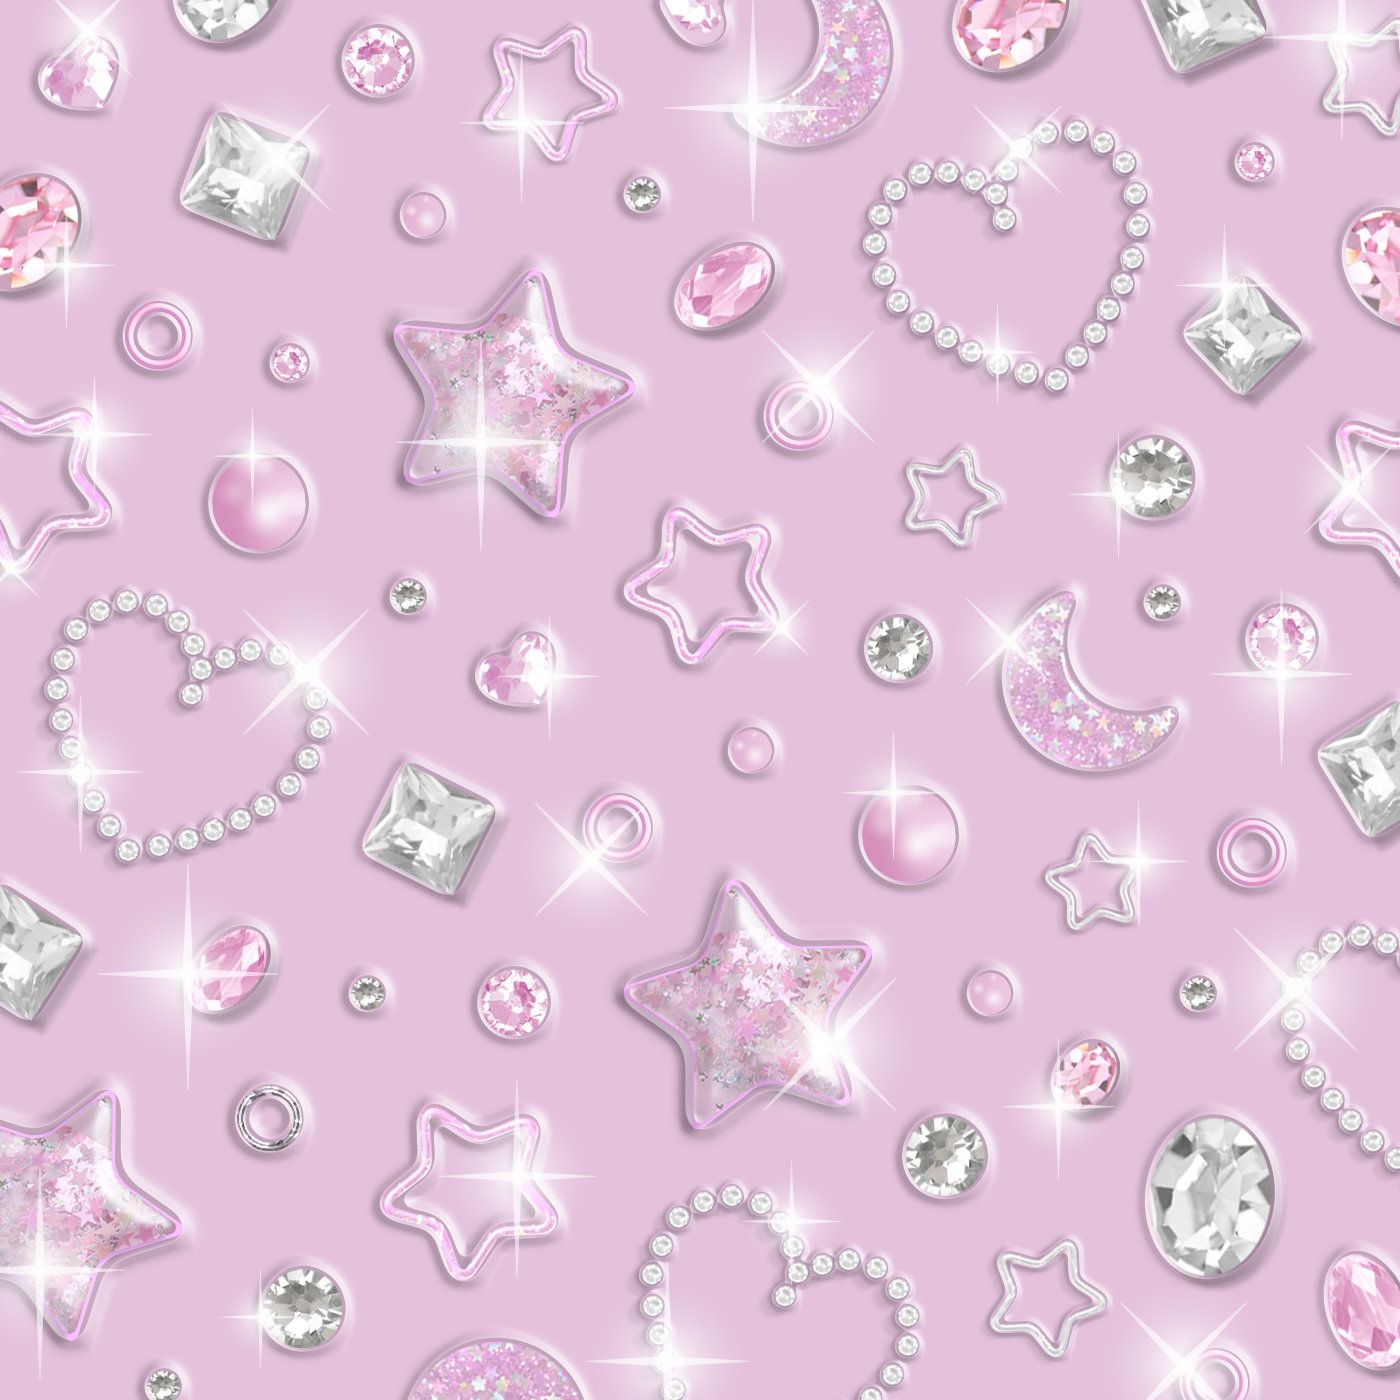 Sparkle and Shine wallpaper in a choice of pink or purple from the Arthouse Wallpaper Boutique range. - Y2K